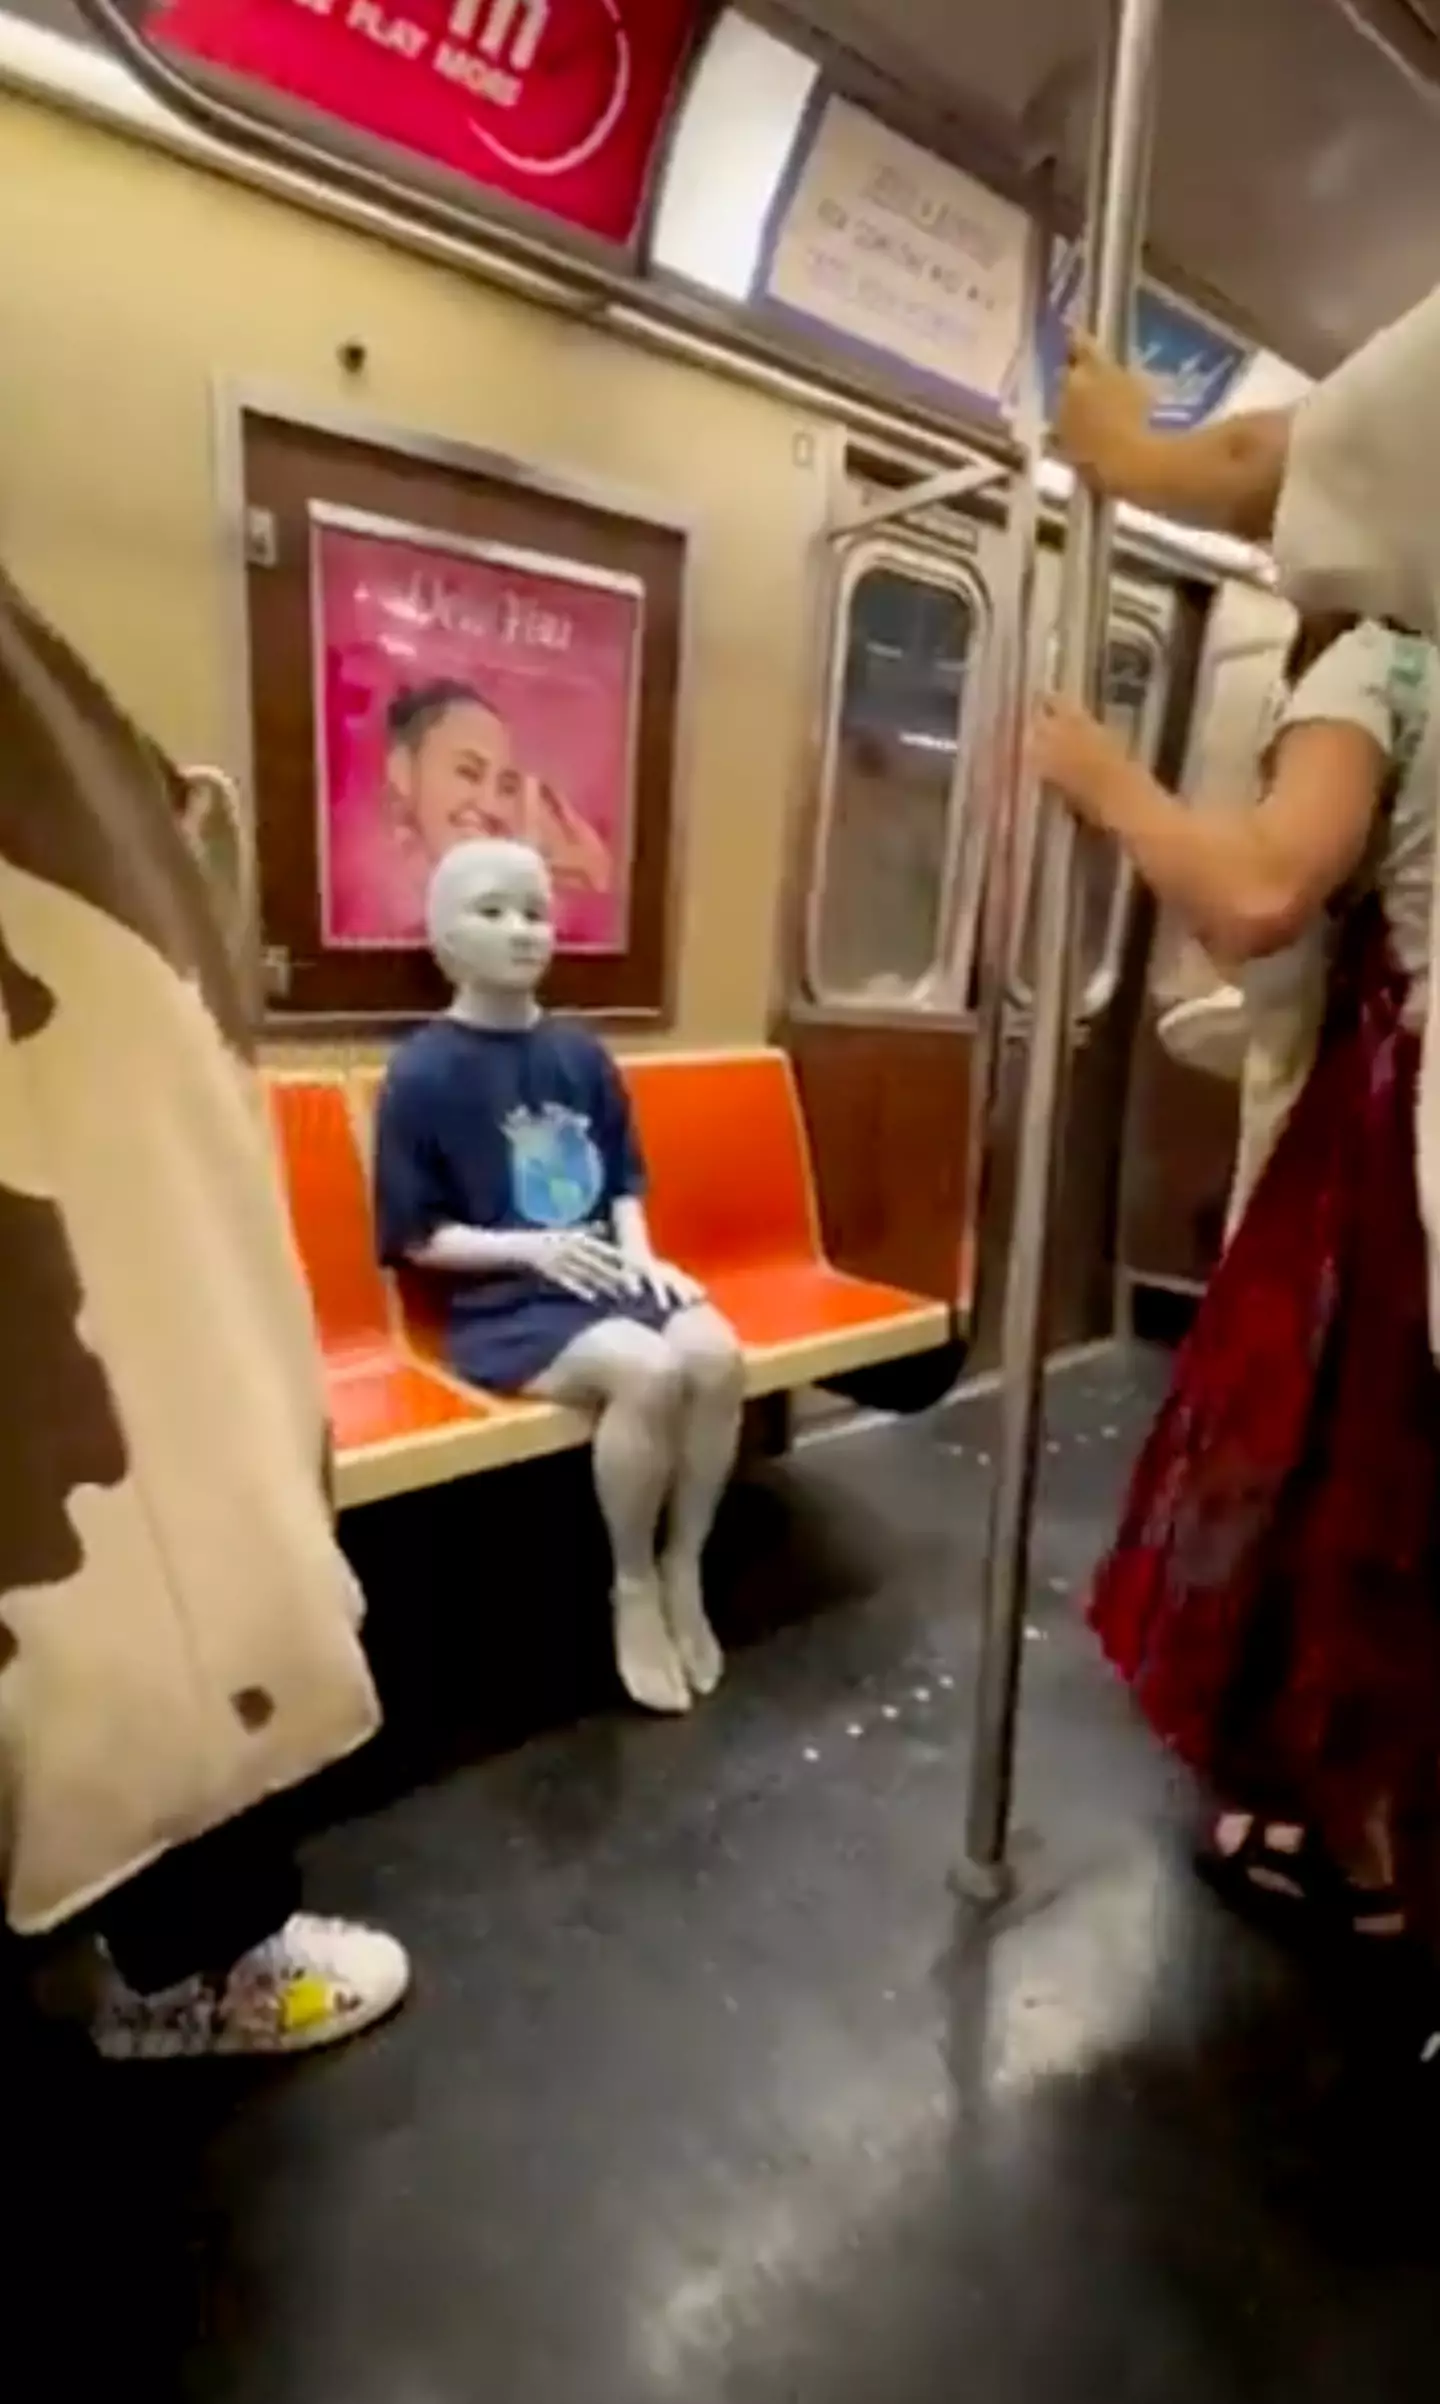 The alien was spotted quietly riding the subway.